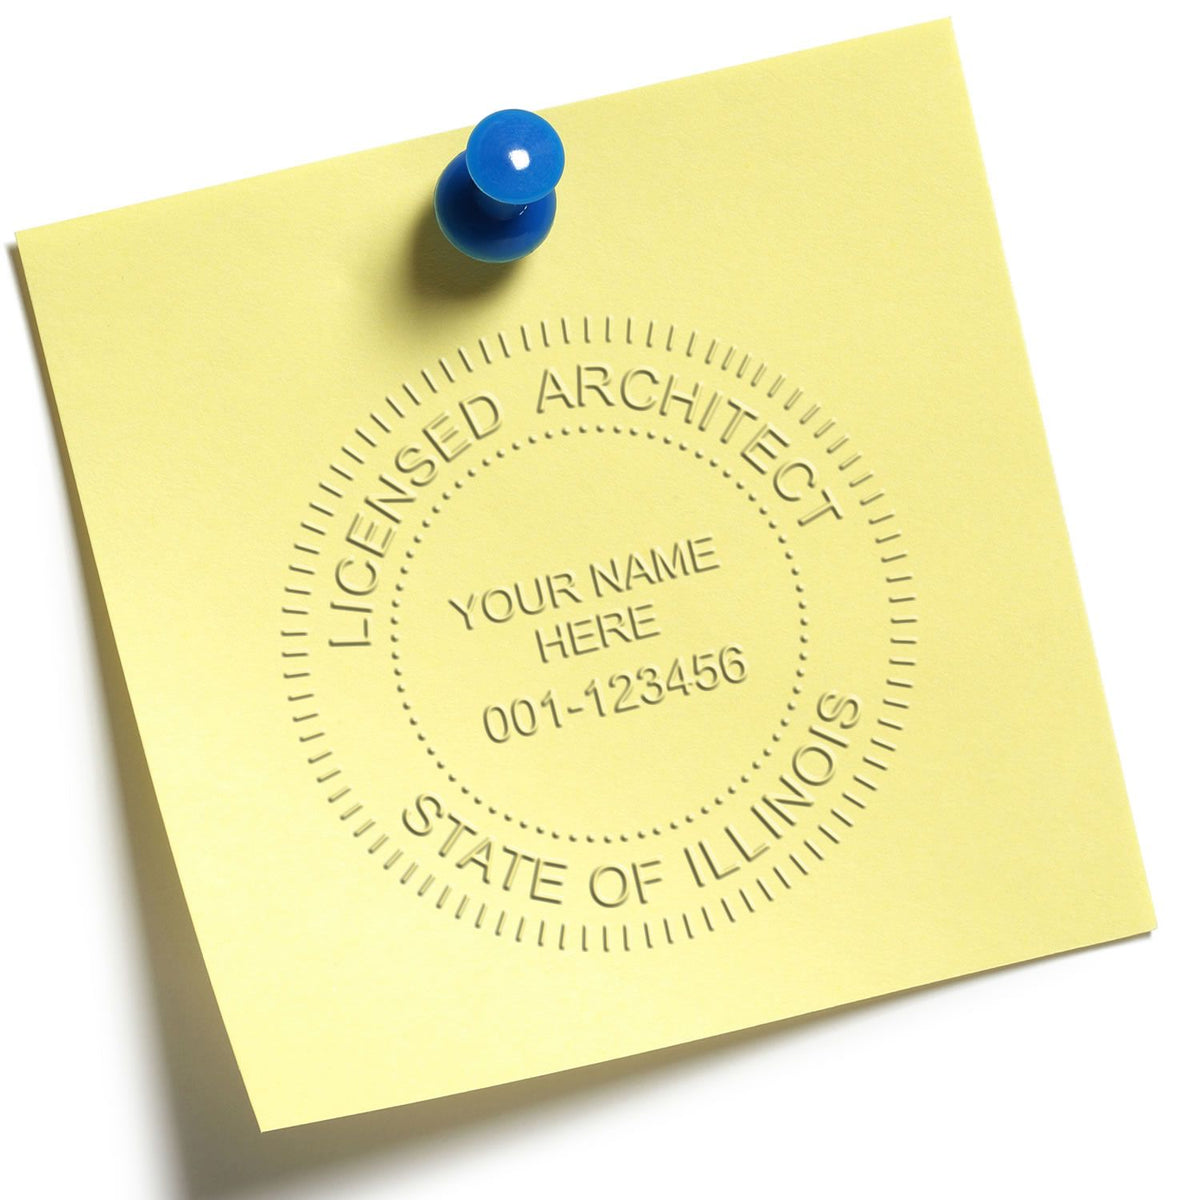 An in use photo of the Gift Illinois Architect Seal showing a sample imprint on a cardstock